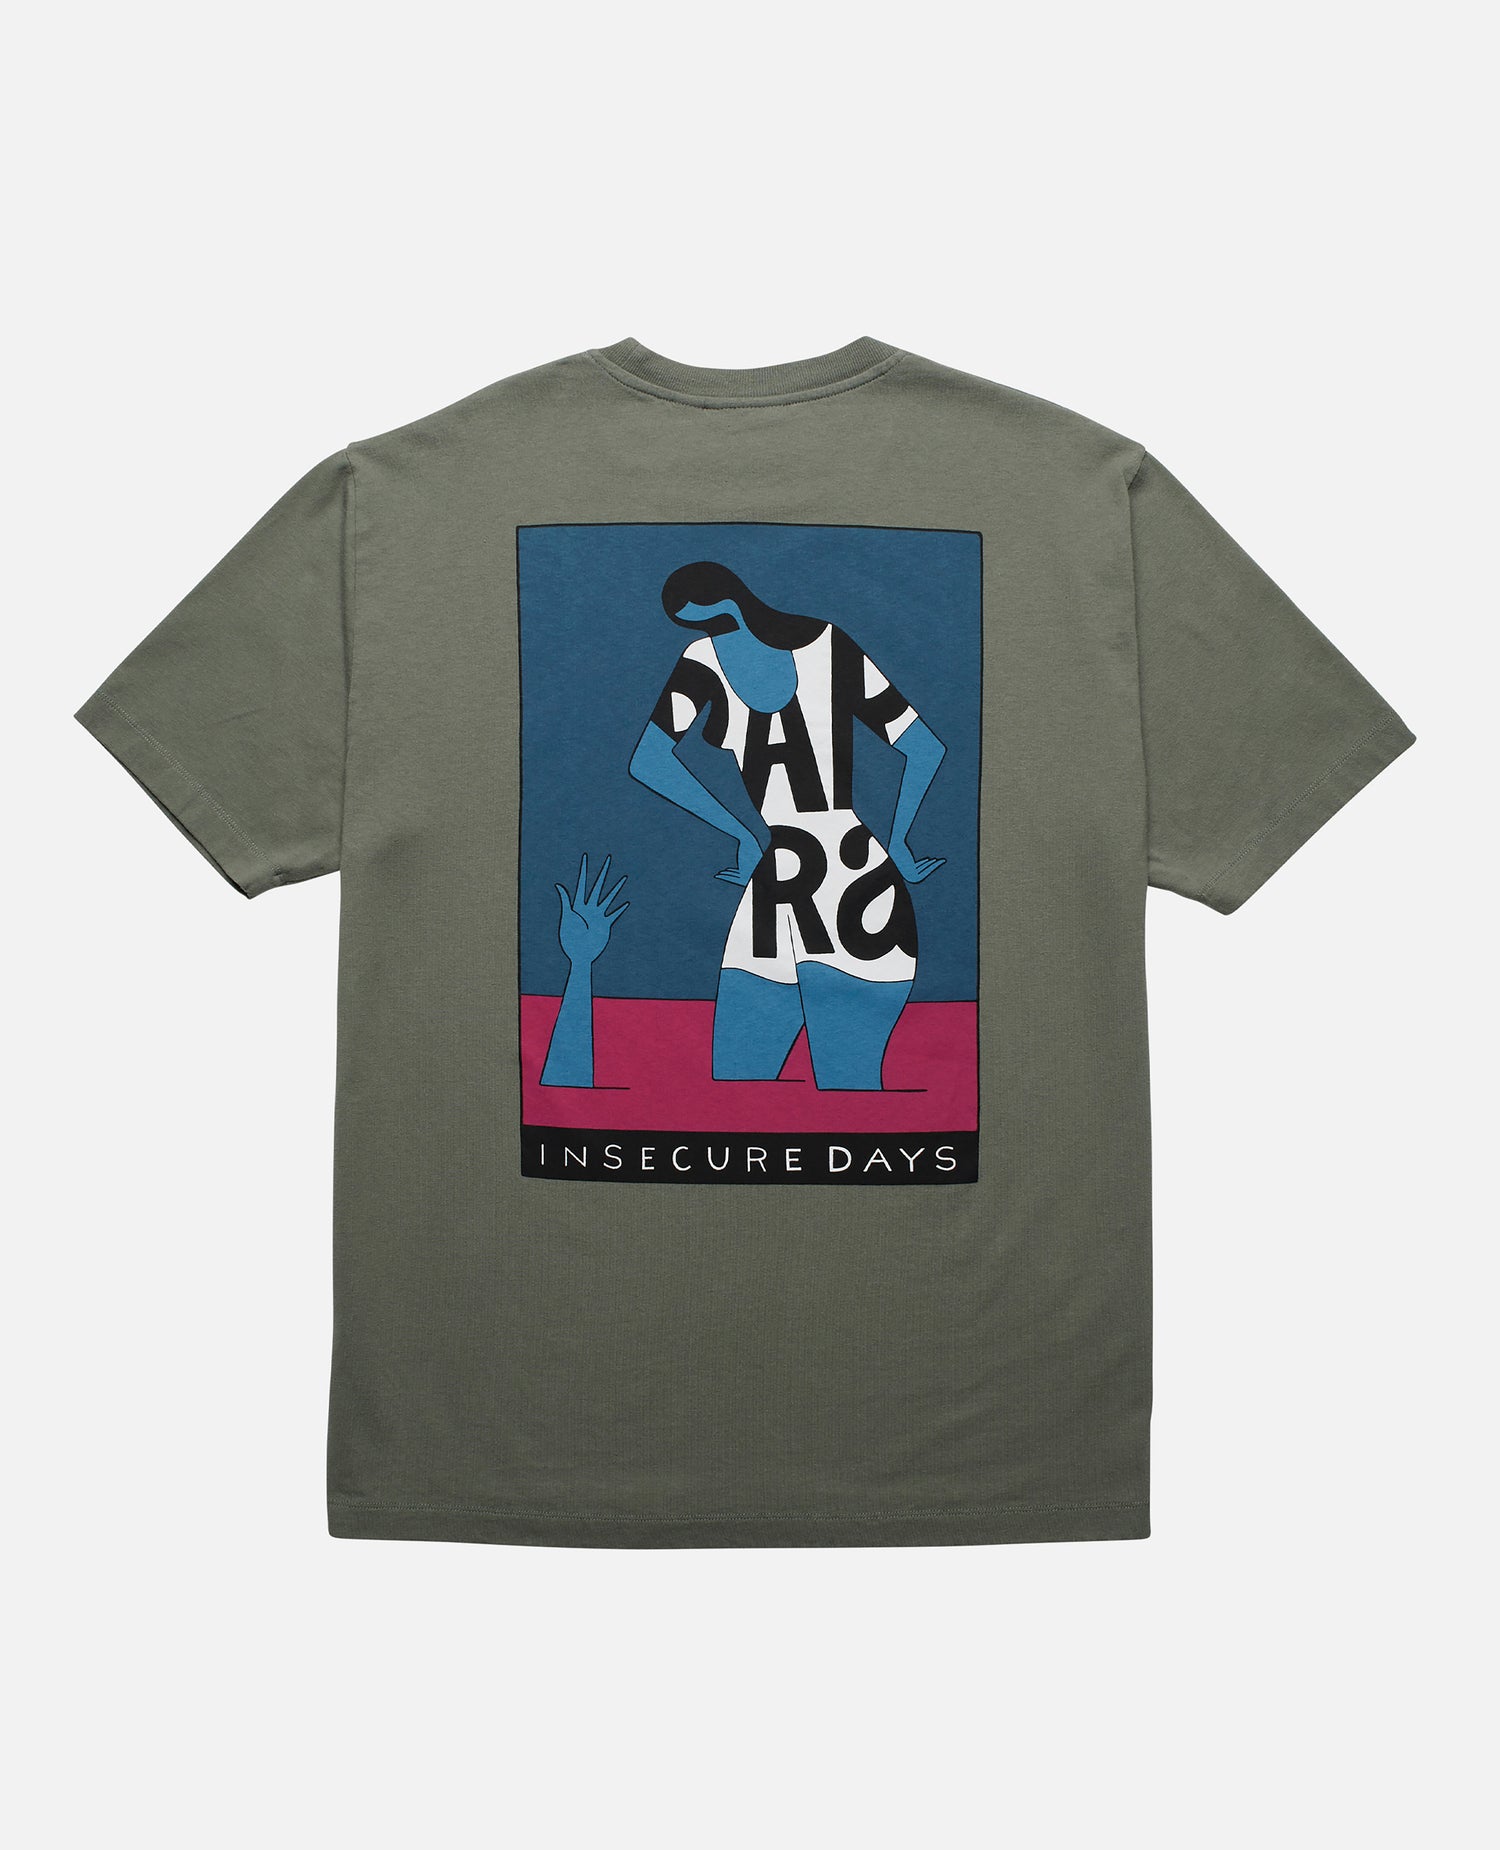 byParra Insecure days T-Shirt (Greyish Green)